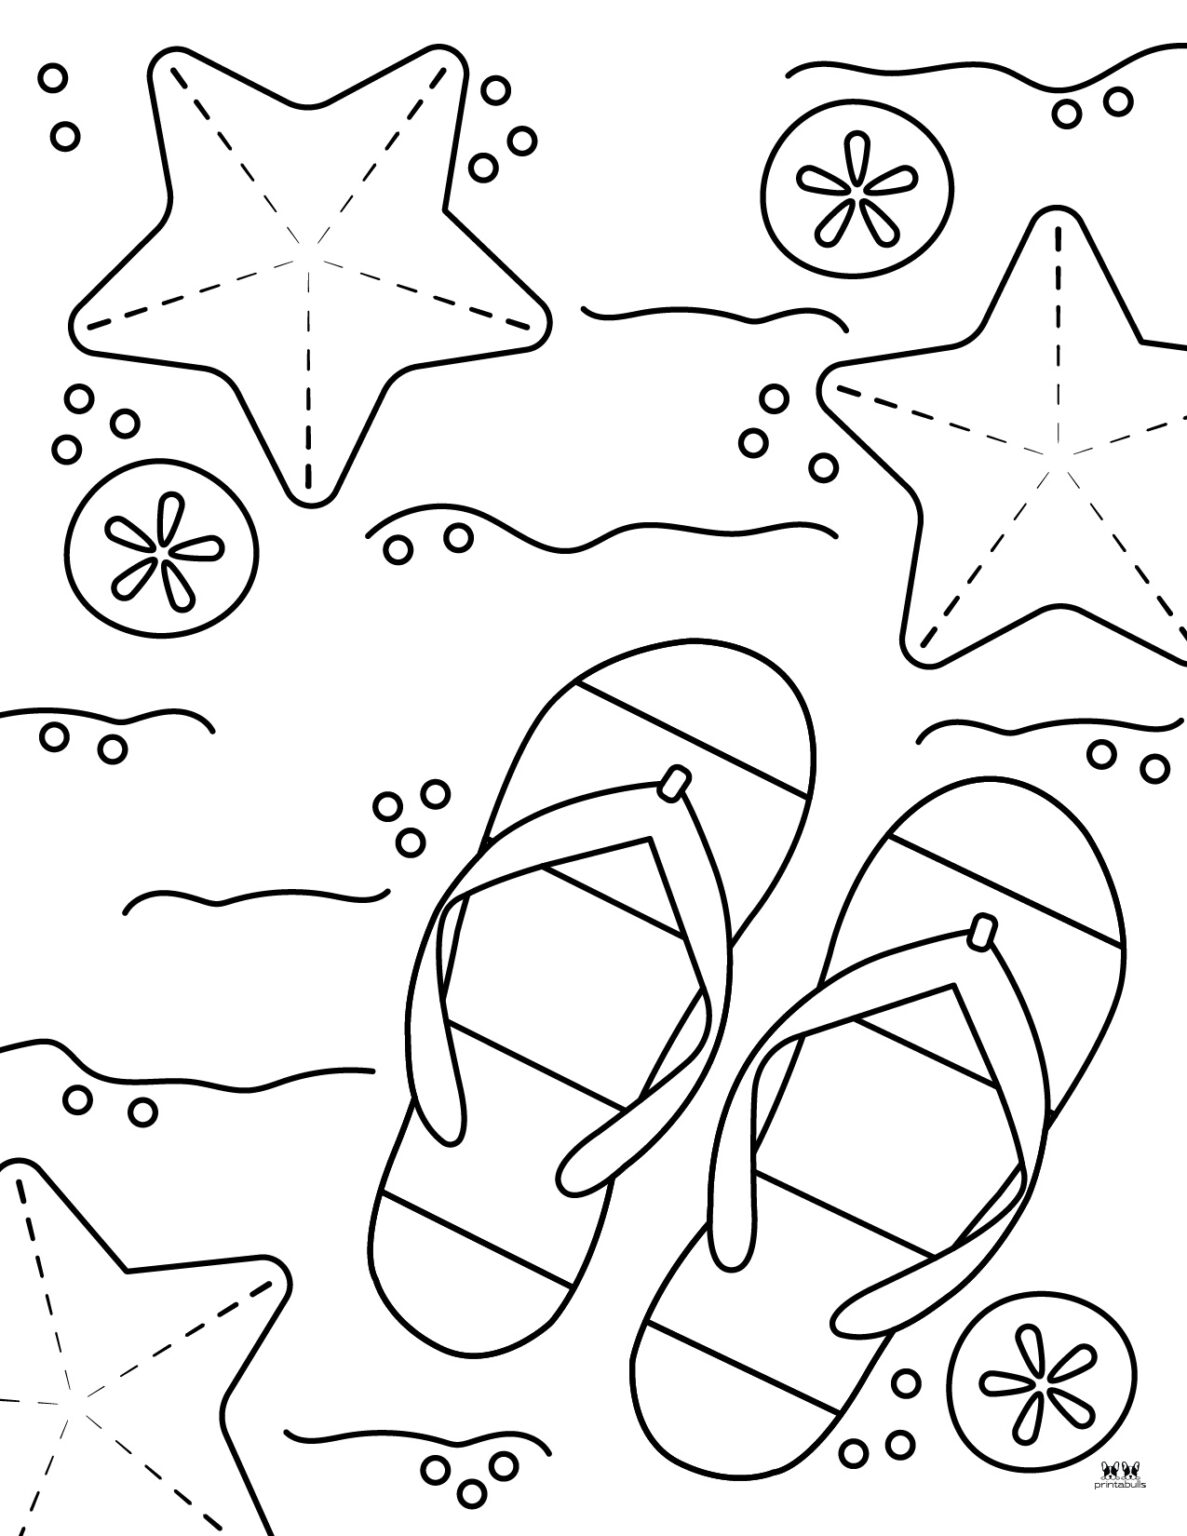 Beach Coloring Pages - 25 FREE Pages | Printabulls